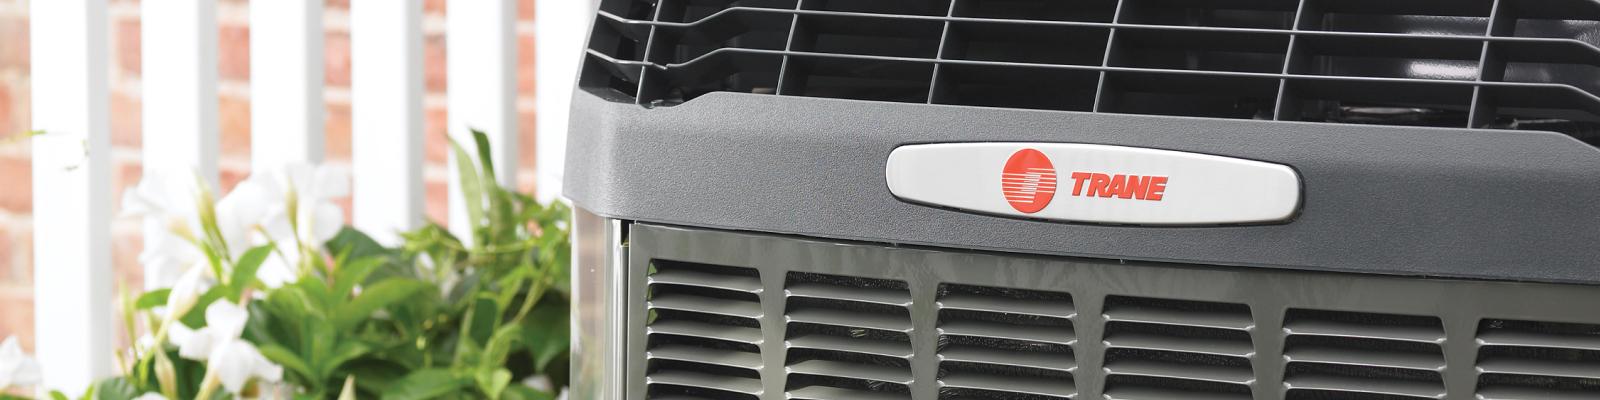 Checklist for Buying a New HVAC System